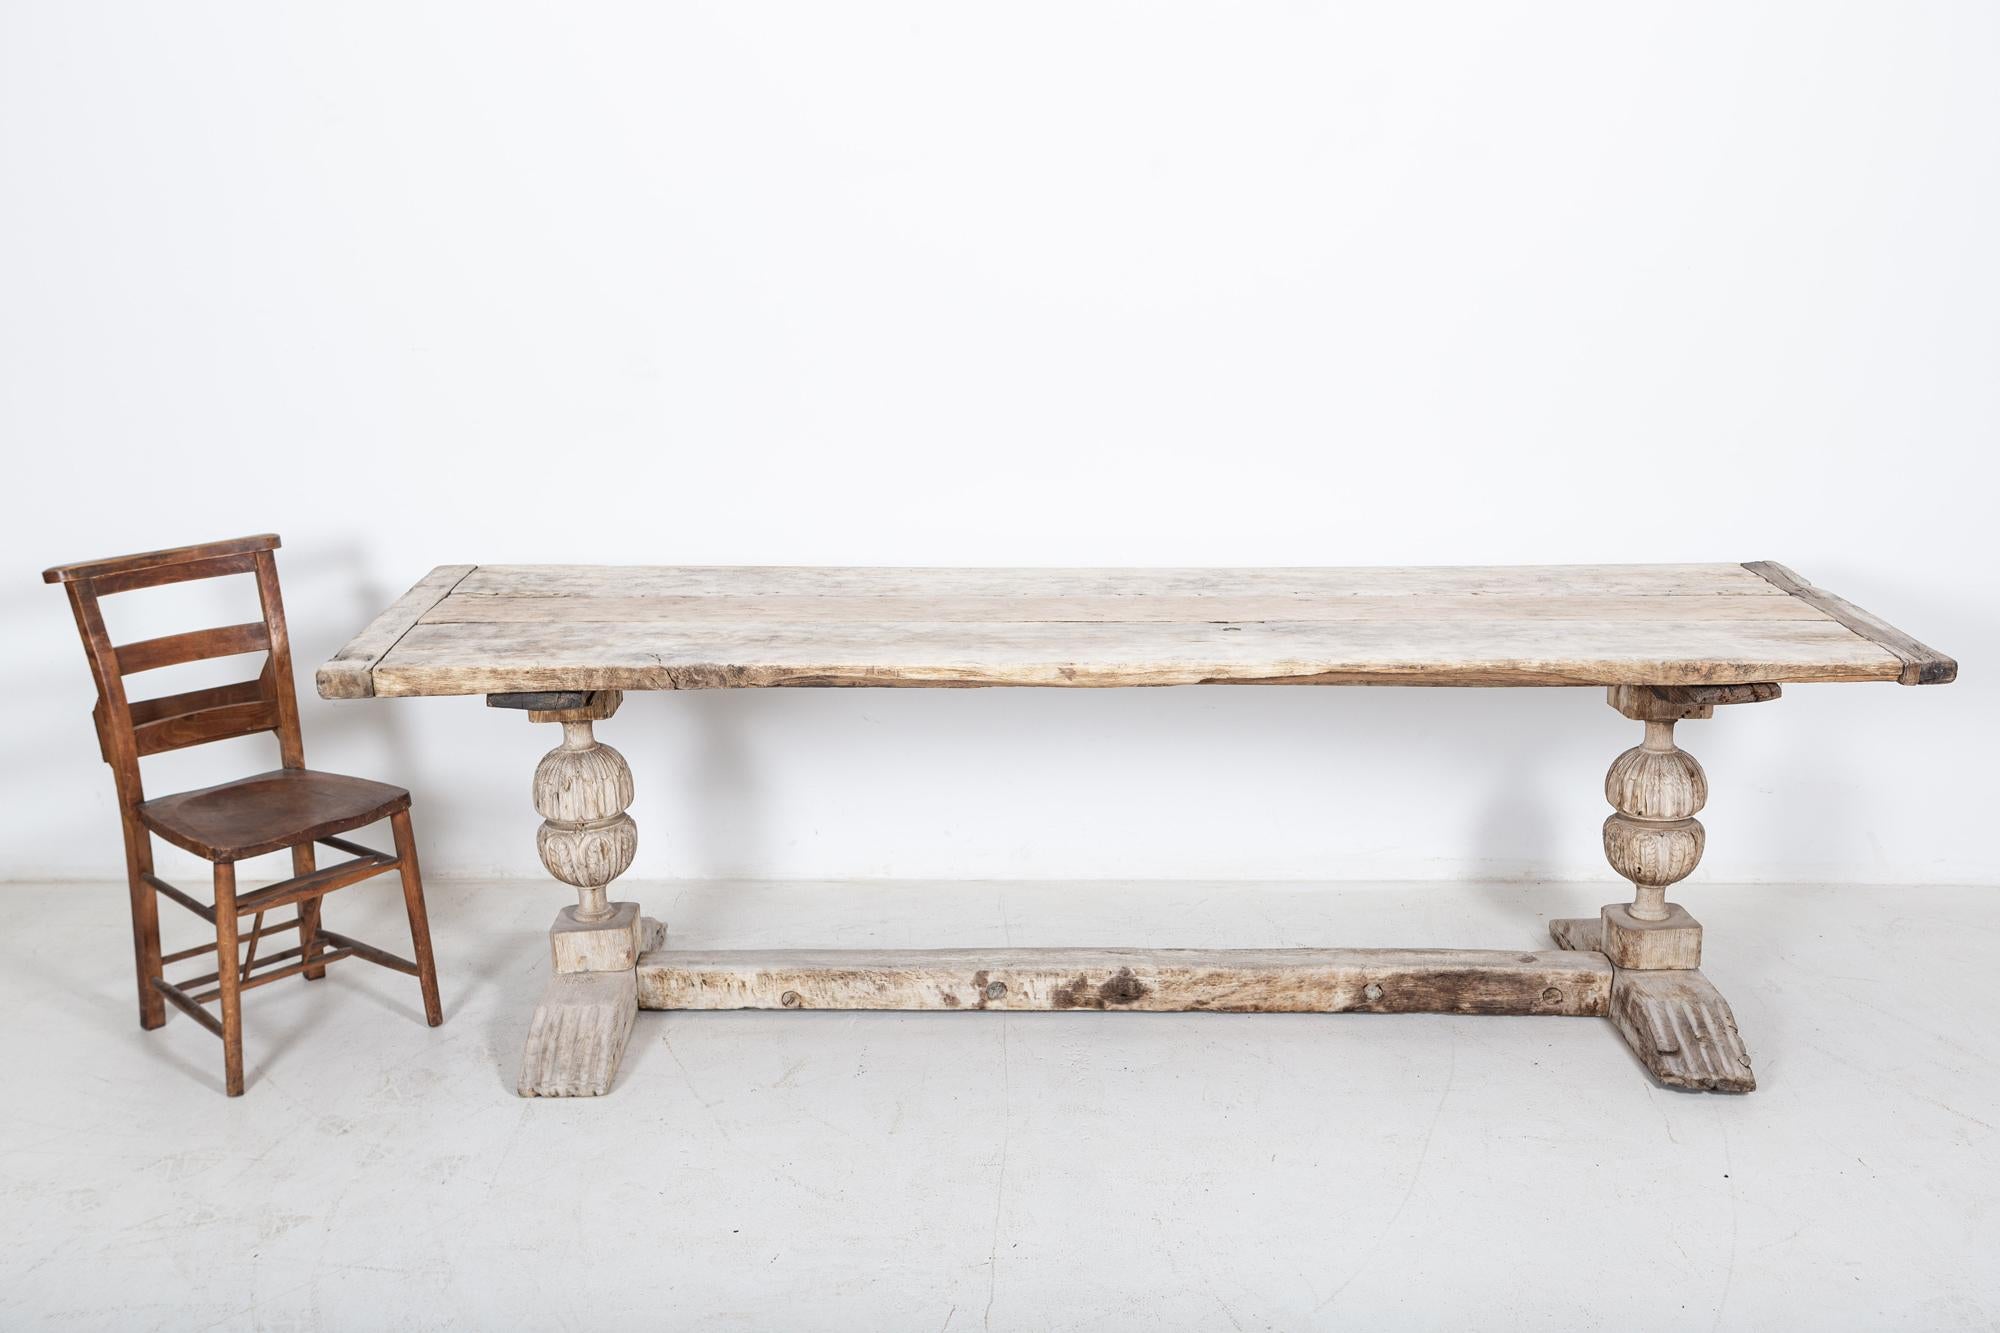 Circa. 1640

19thC Exceptional English Bleached Oak Refectory Table

Three plank oak top with bread board ends raised on bulbous carved cup and cover supports united by a central square cross-stretcher.

Joints have been strengthened

Sourced from